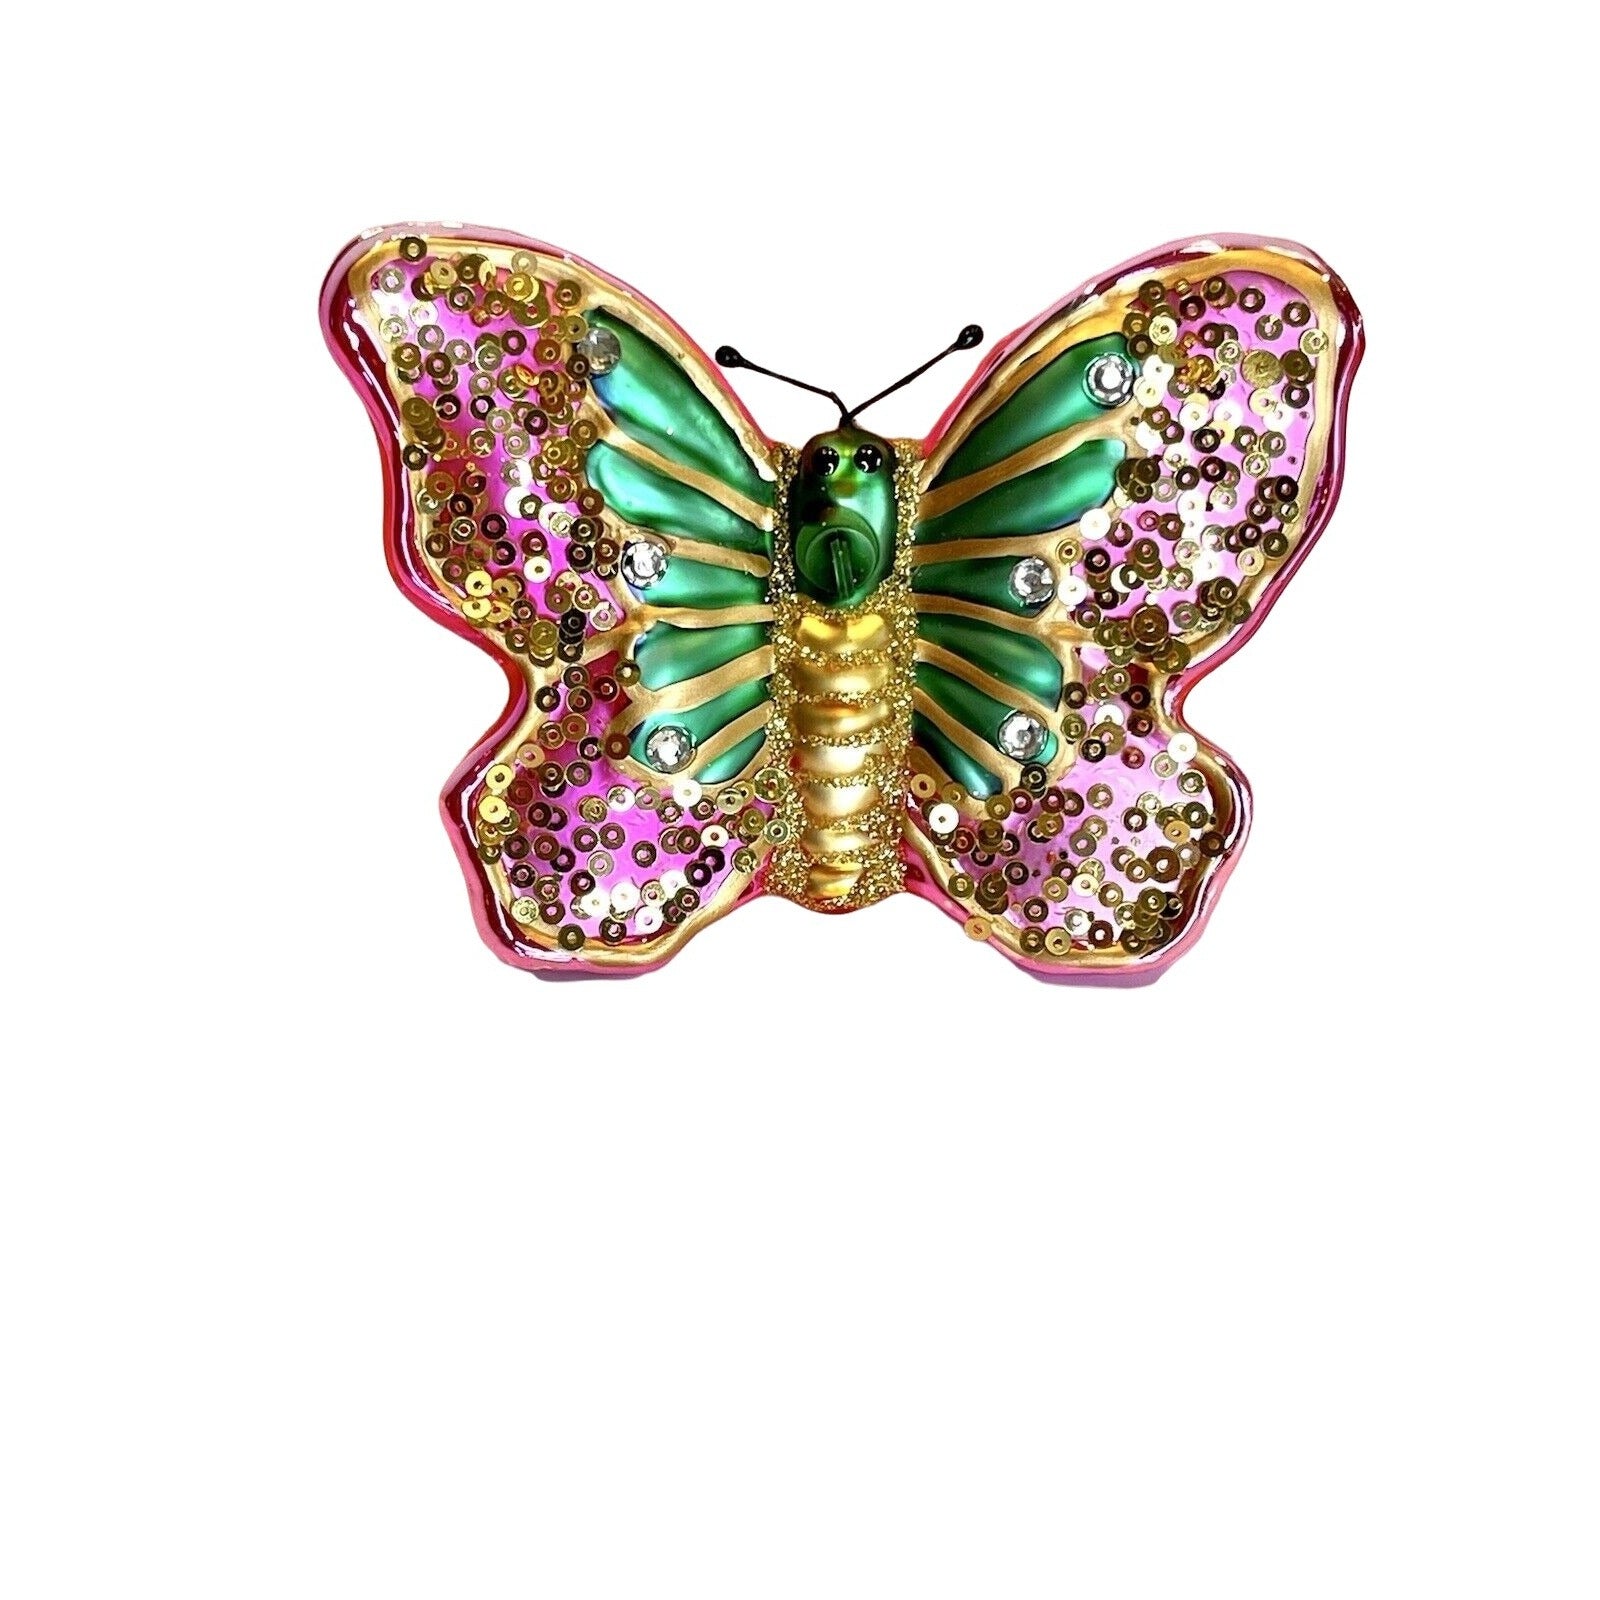 Blown Glass Butterfly Ornament by Robert Stanley With Sequins Pink NEW